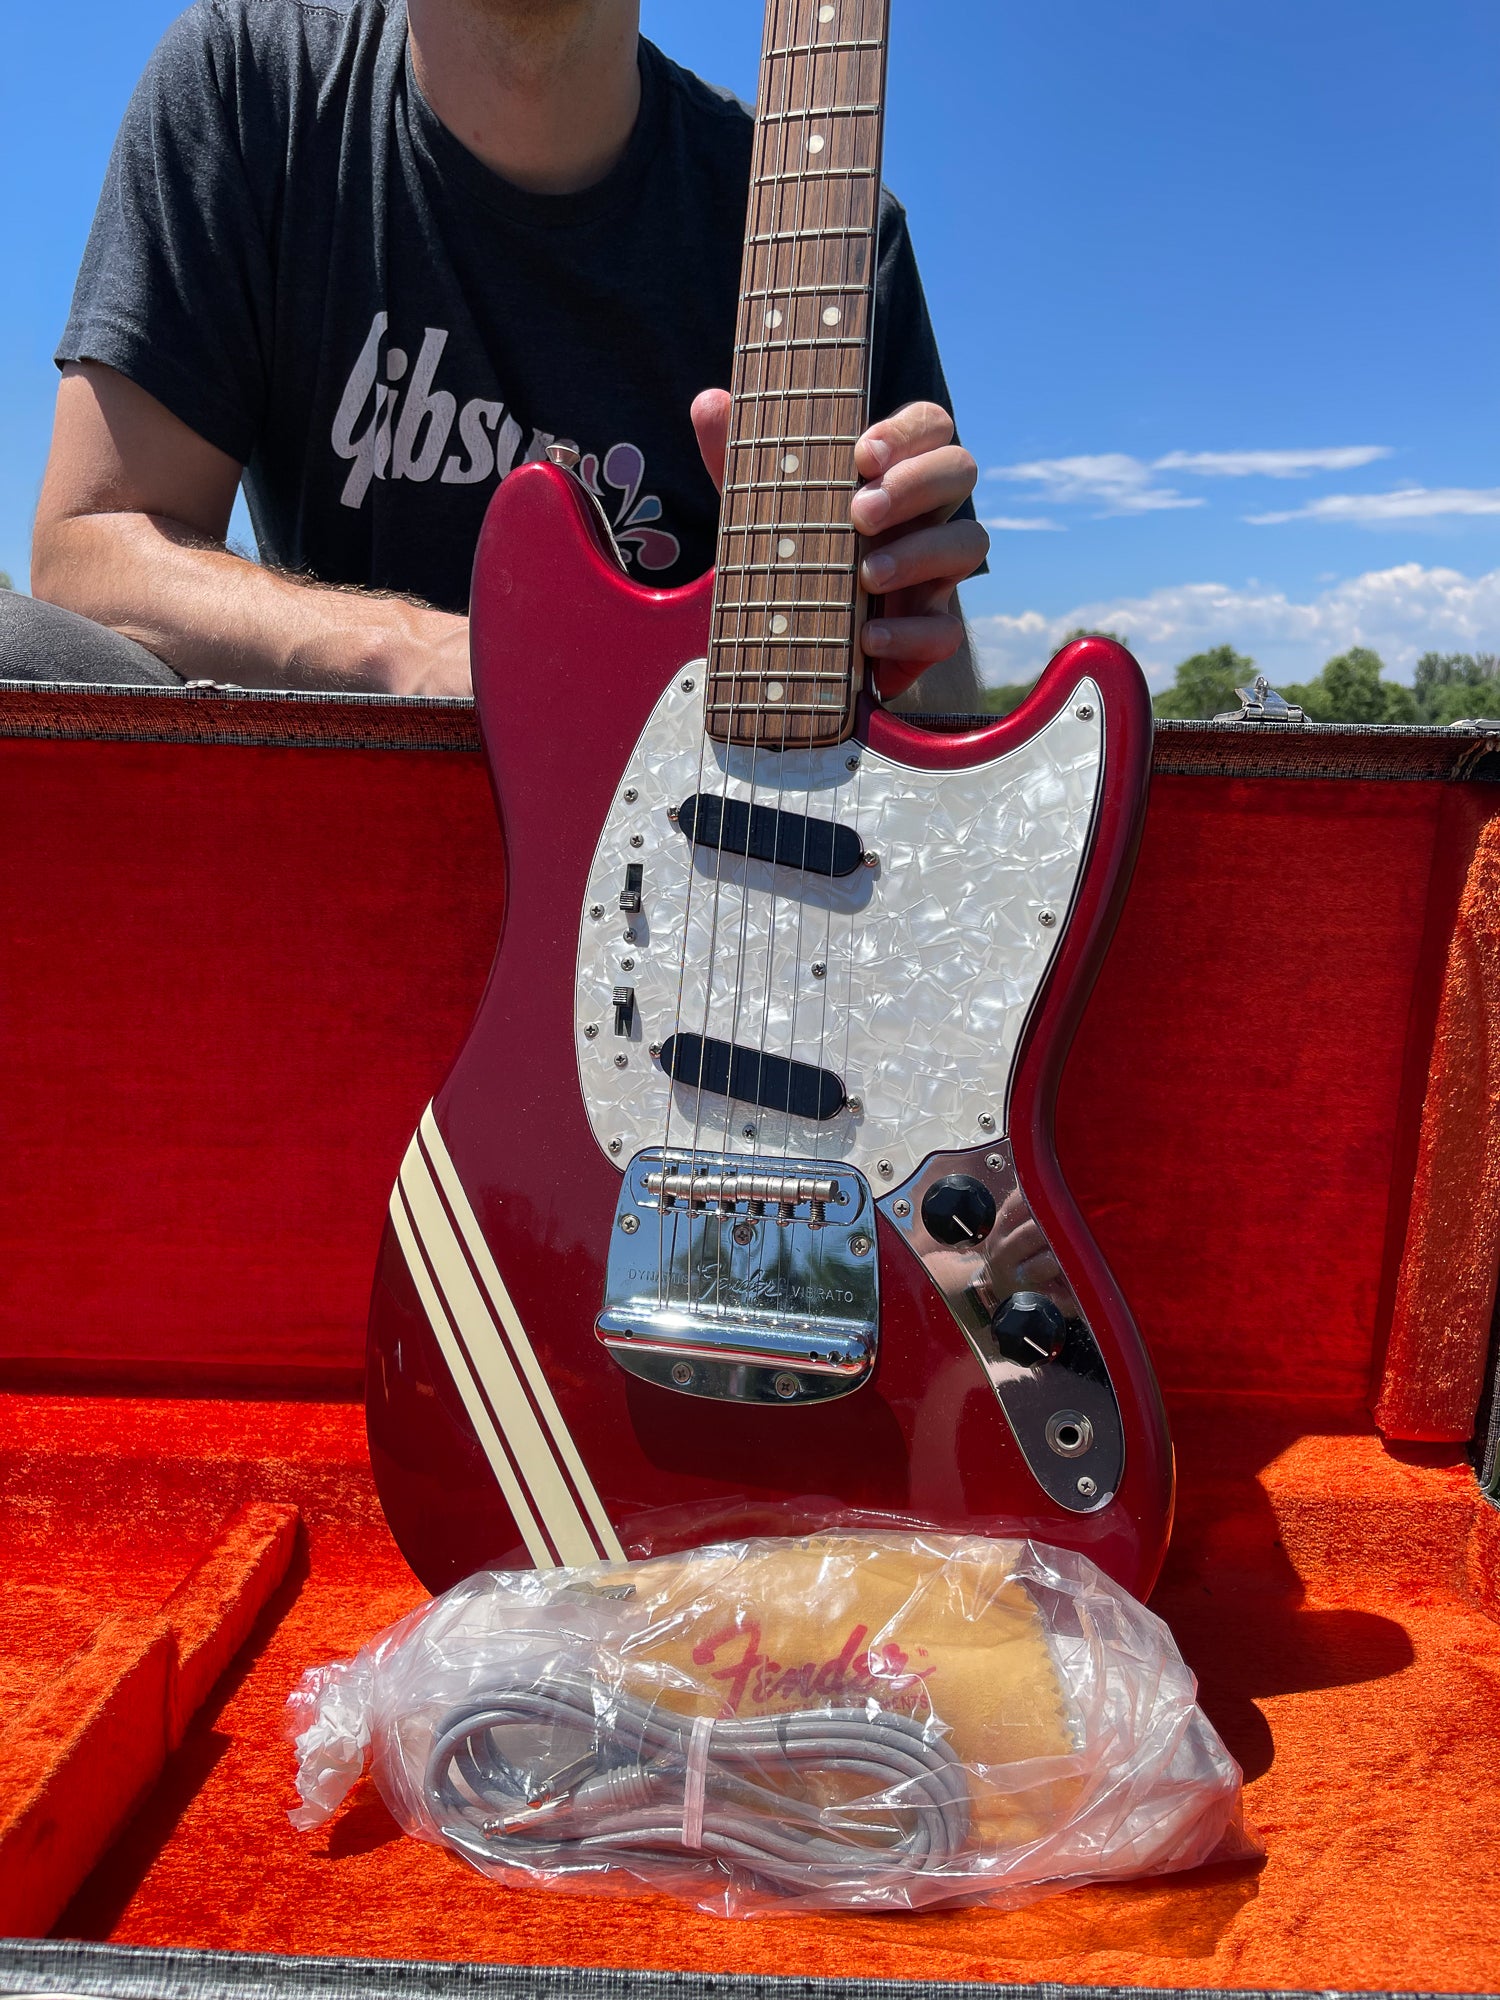 1972 Fender Mustang with case candy in guitar collection in Colorado